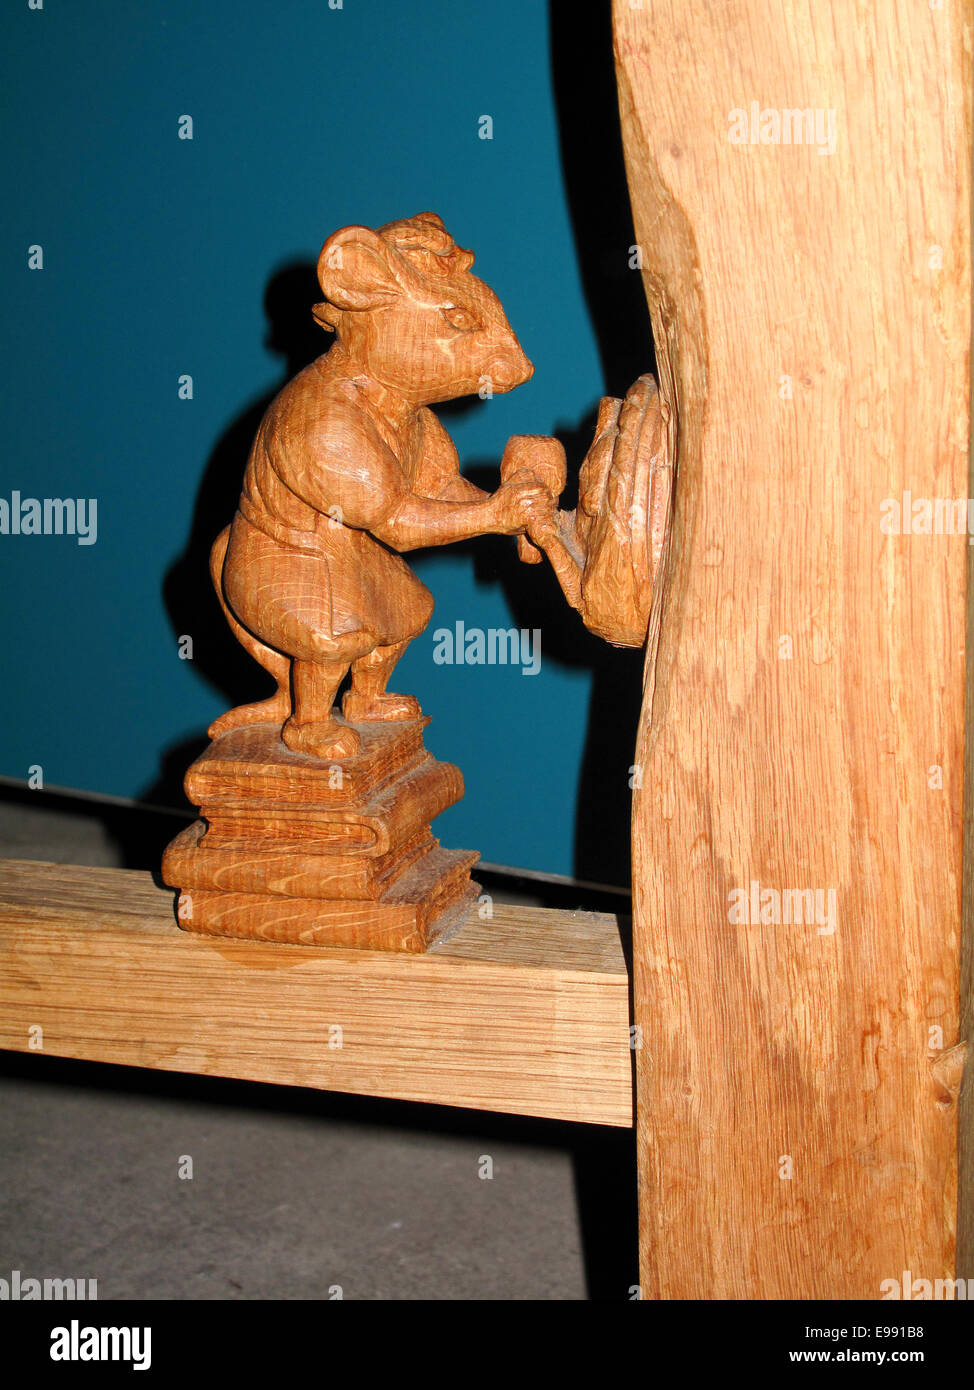 Small Carved Wooden Mouse As Trademark On Wooden Furniture Stock